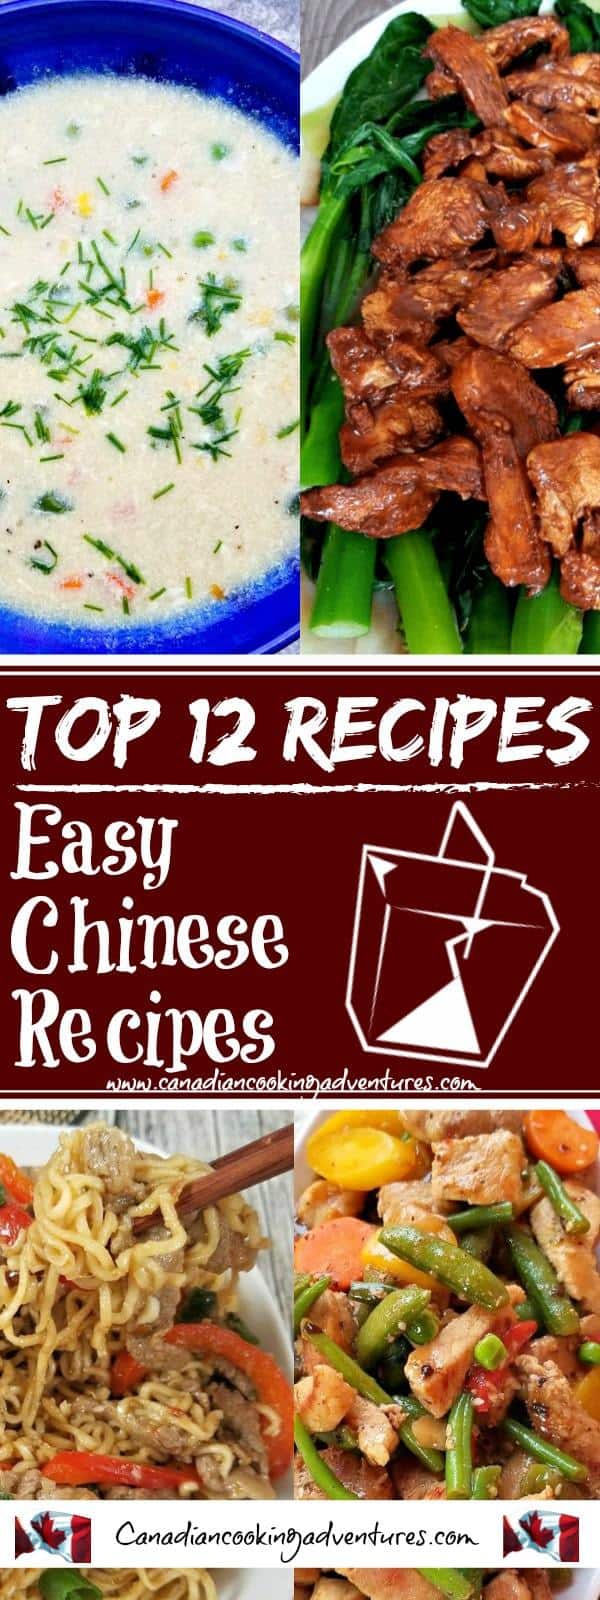 Top 12 Easy Chinese Recipes